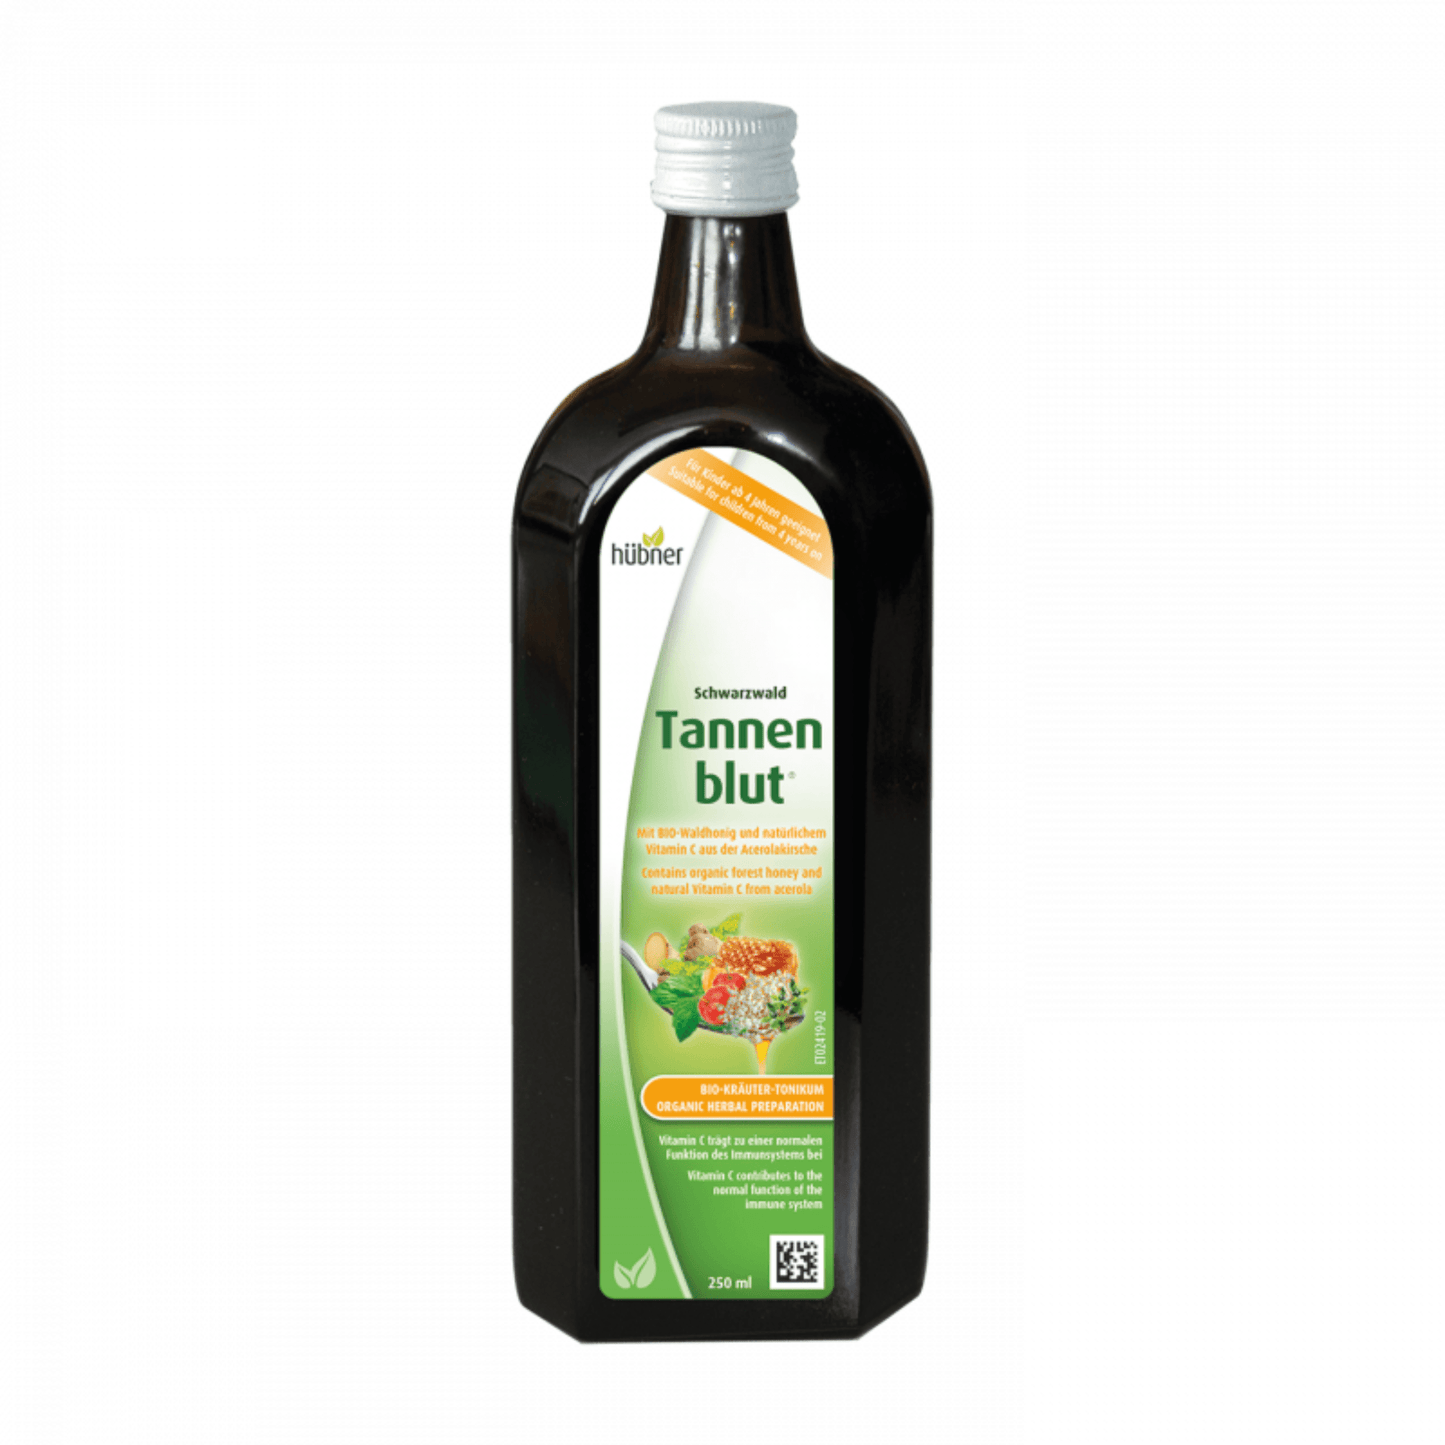 Alternate Image of Organic Tannenblut Cough Syrup Bottle